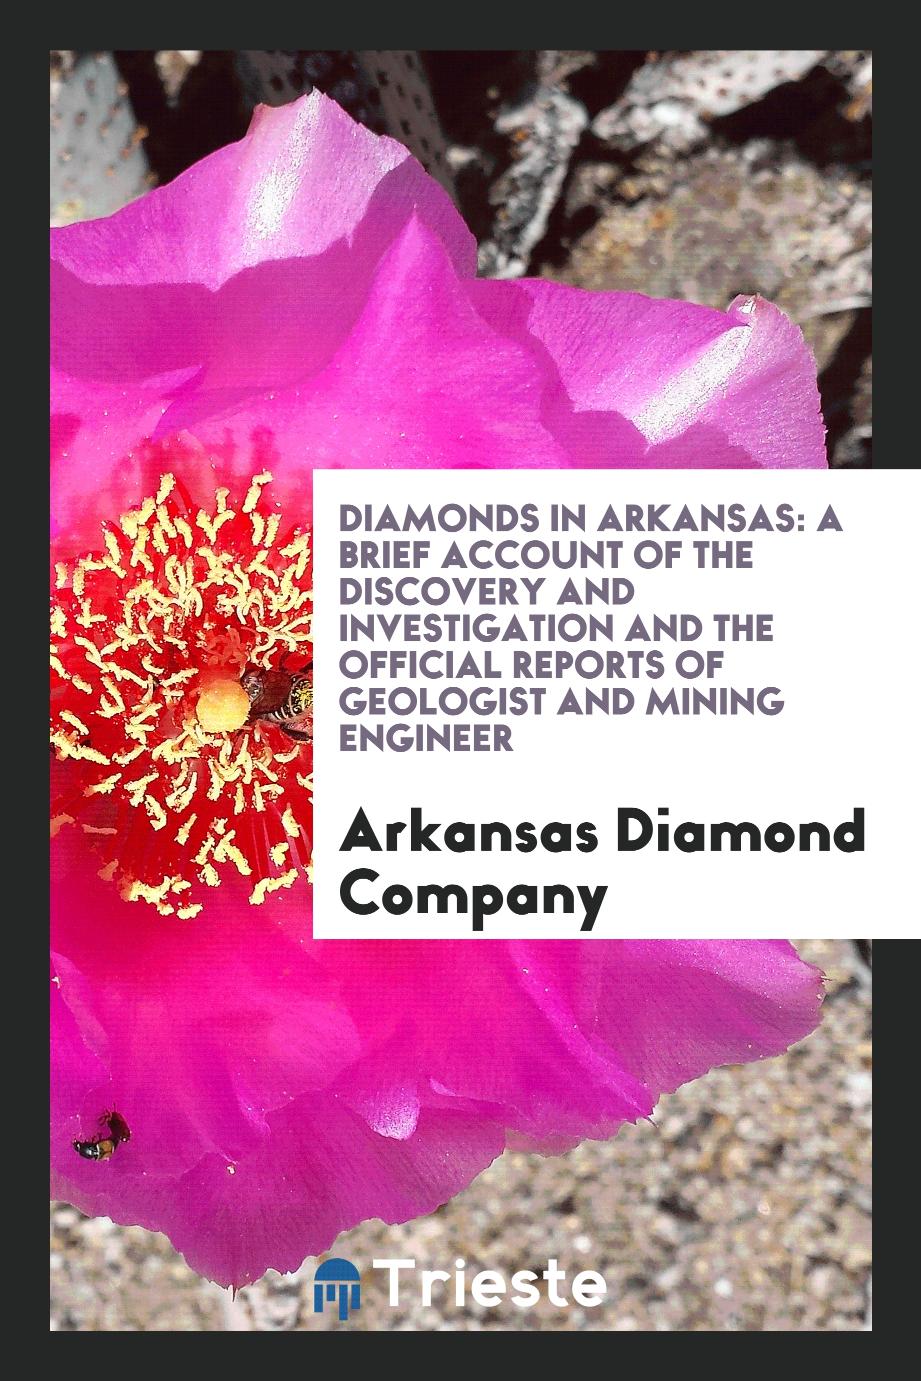 Diamonds in Arkansas: A Brief Account of the Discovery and Investigation and the Official Reports of Geologist and Mining Engineer